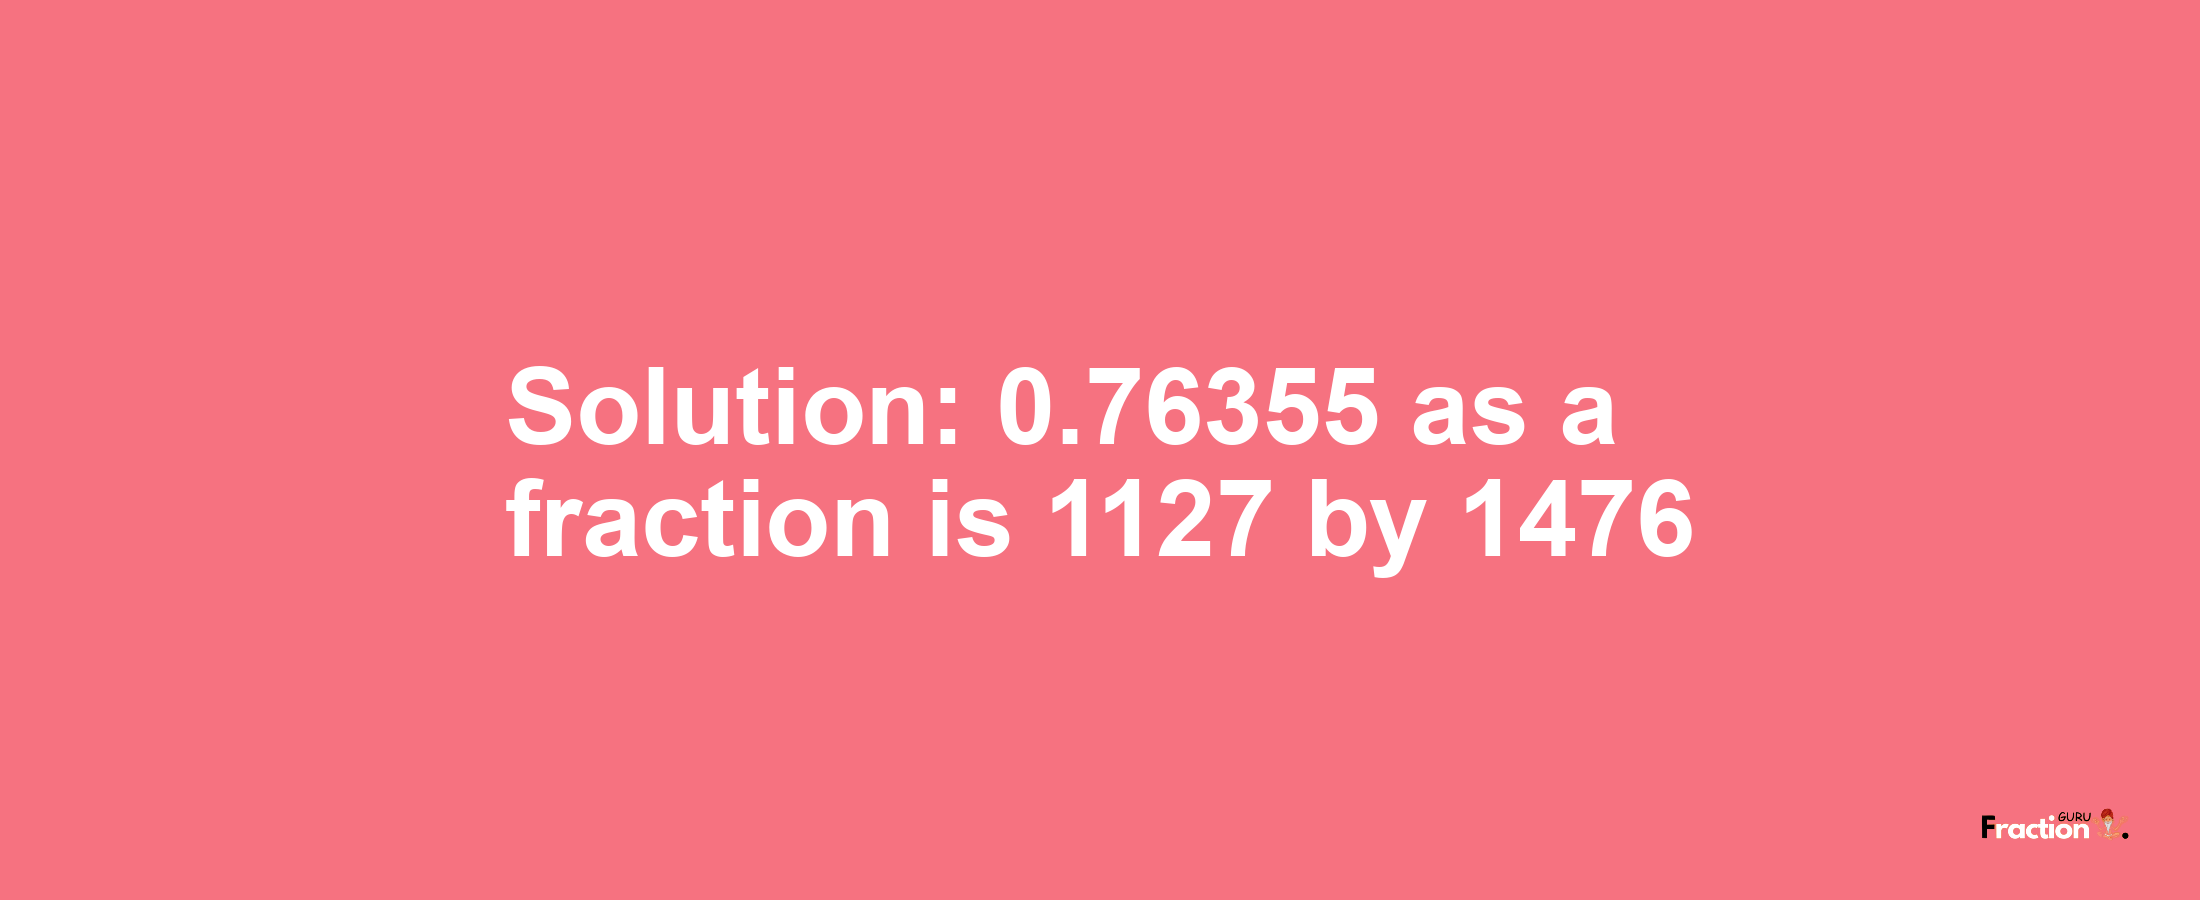 Solution:0.76355 as a fraction is 1127/1476